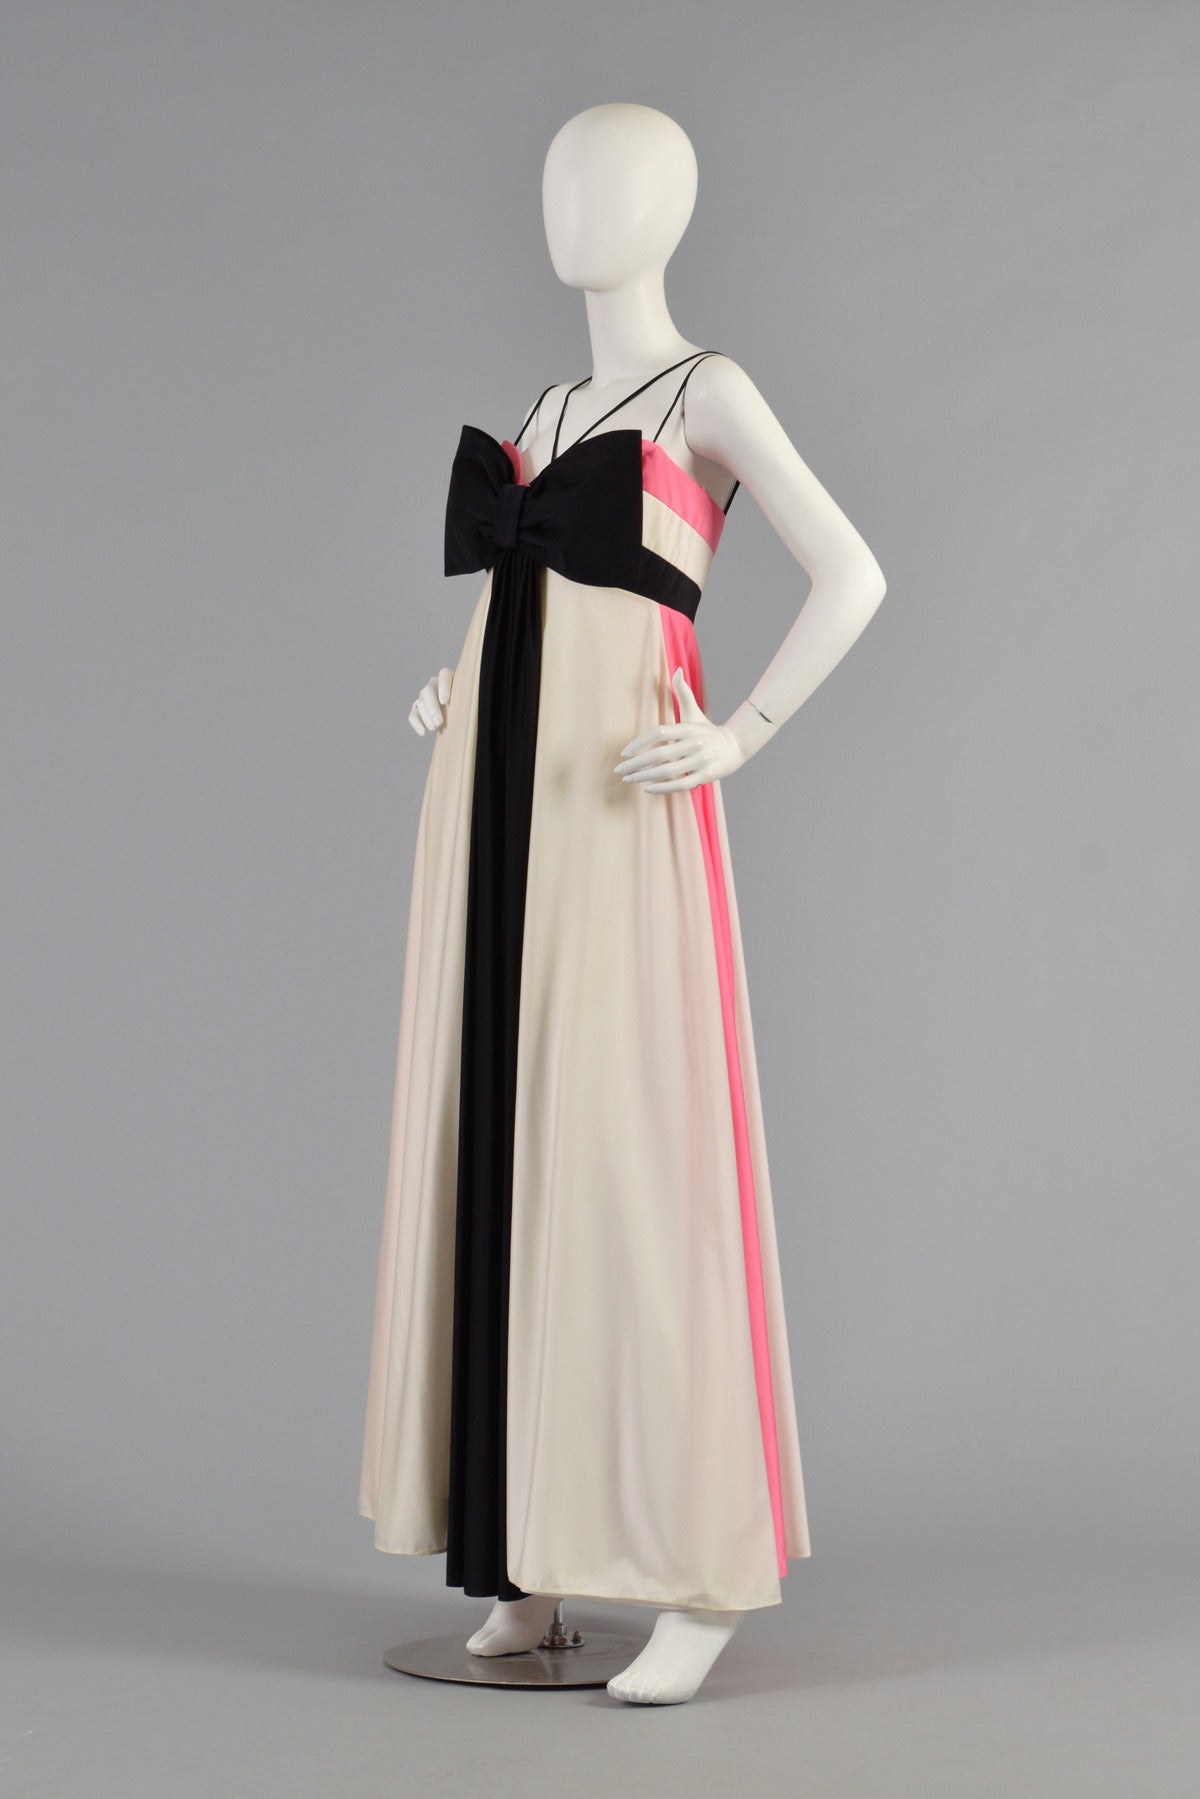 Les Wilk 1970's Colorblock Evening Gown with Massive Bow For Sale 3